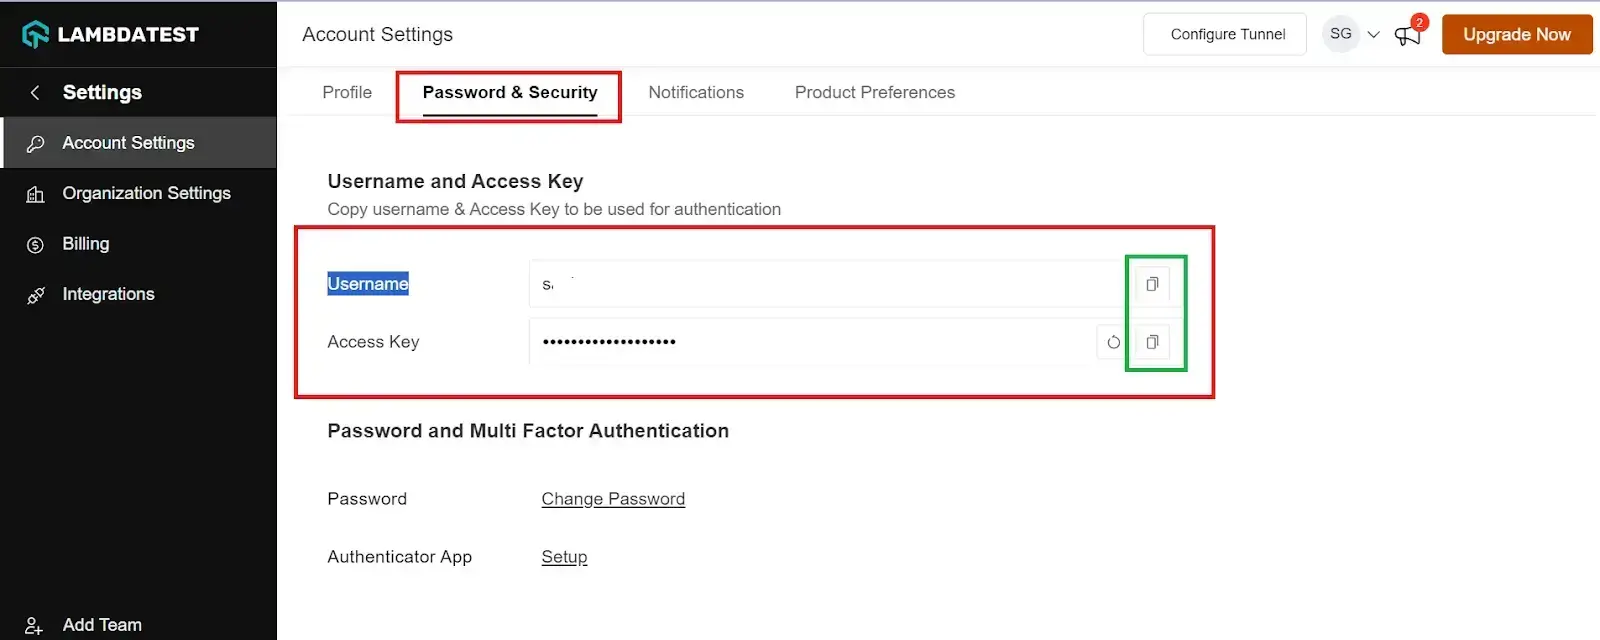 Username and Access Key from the Password & Security tab